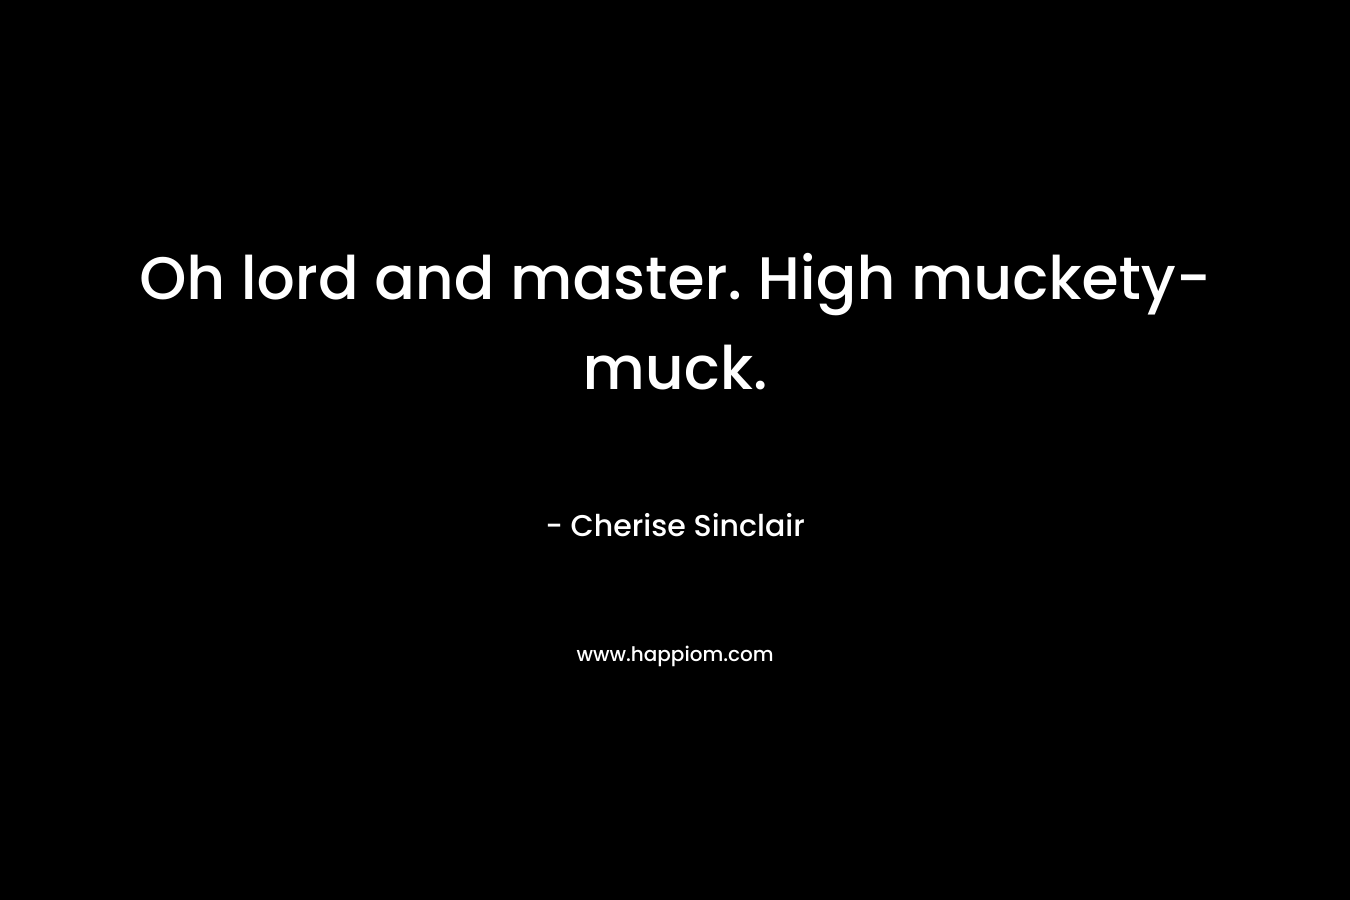 Oh lord and master. High muckety-muck.